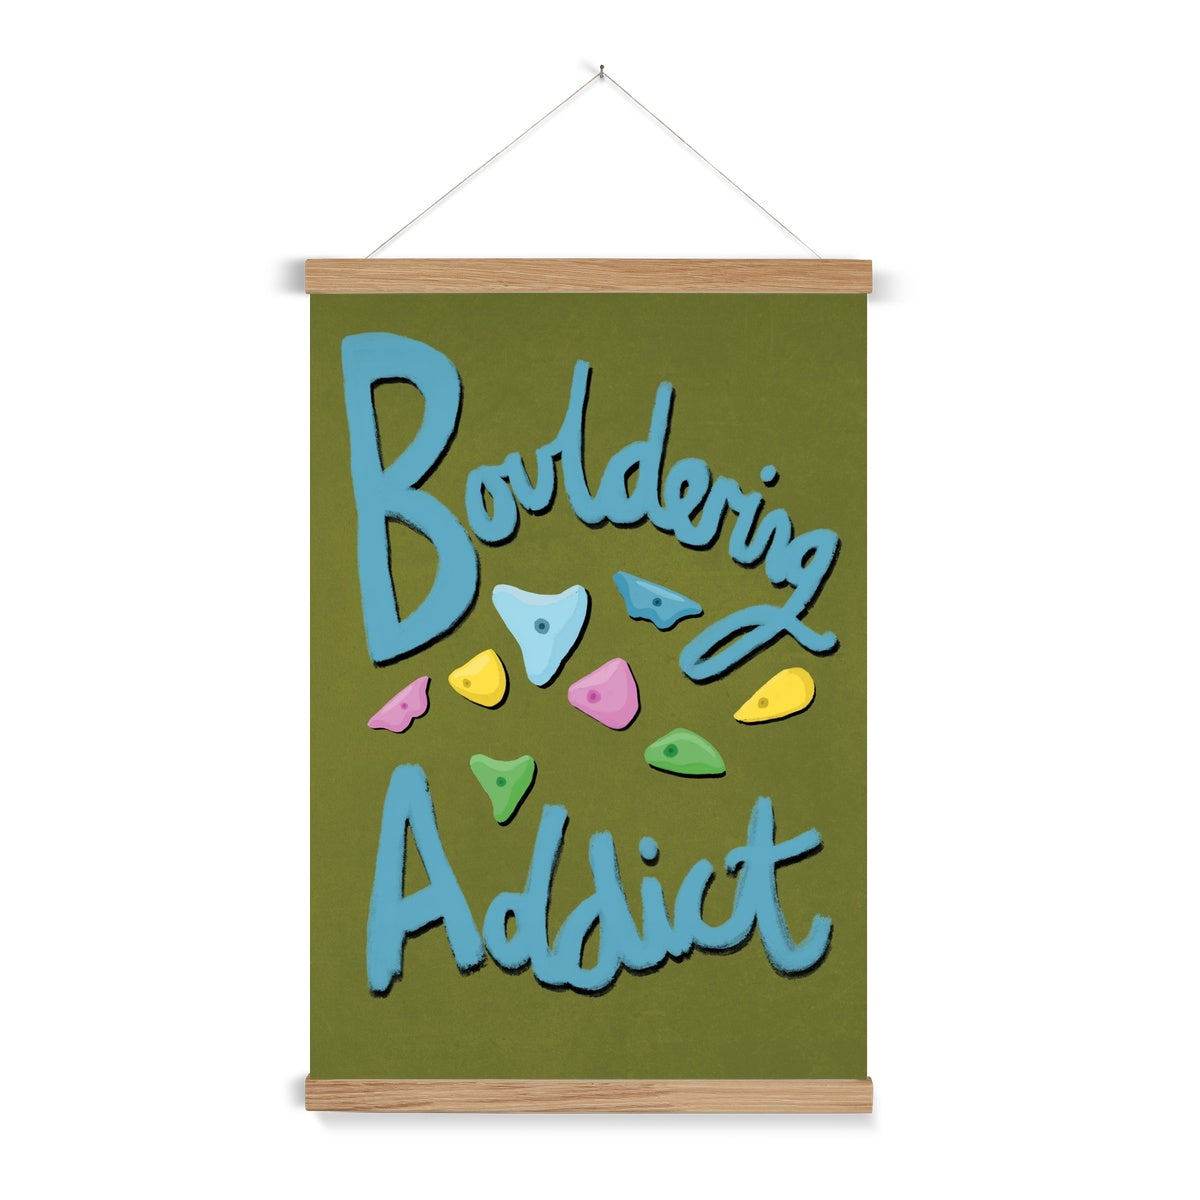 Bouldering Addict - Olive Green and Blue Fine Art Print with Hanger